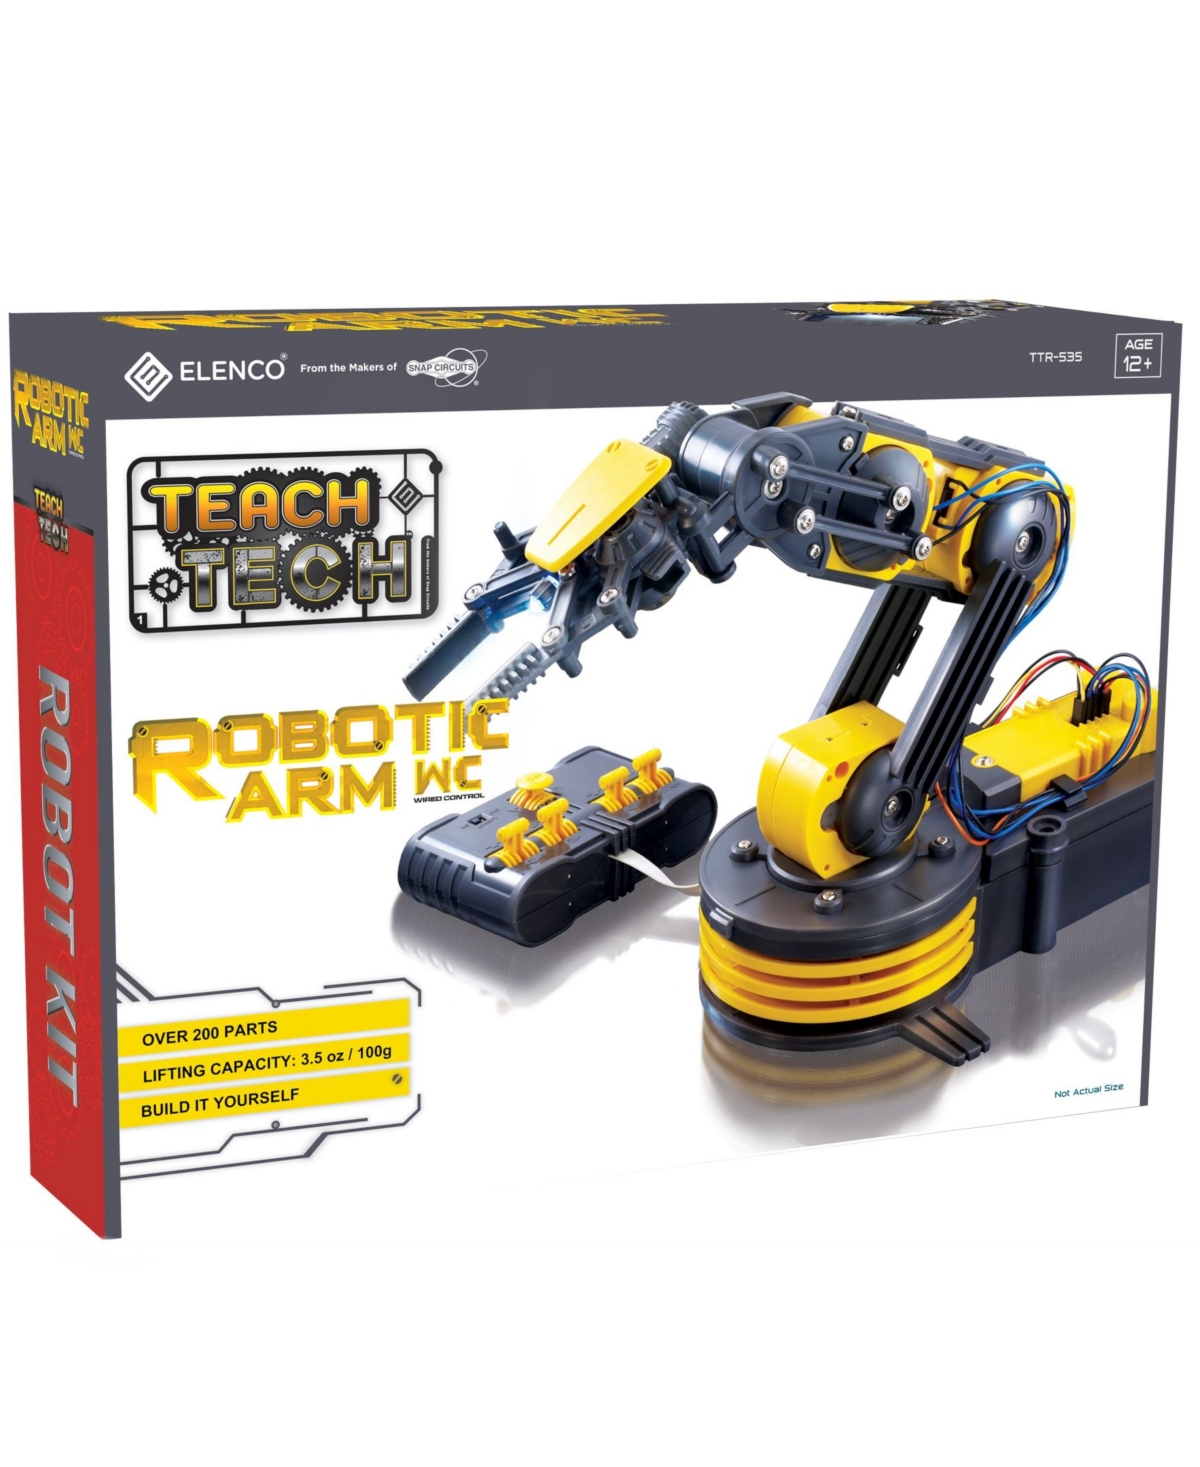 Redbox Teach Tech Robotic Arm Wire Controlled Robotic Arm Kit Stem Educational Toys In Multi